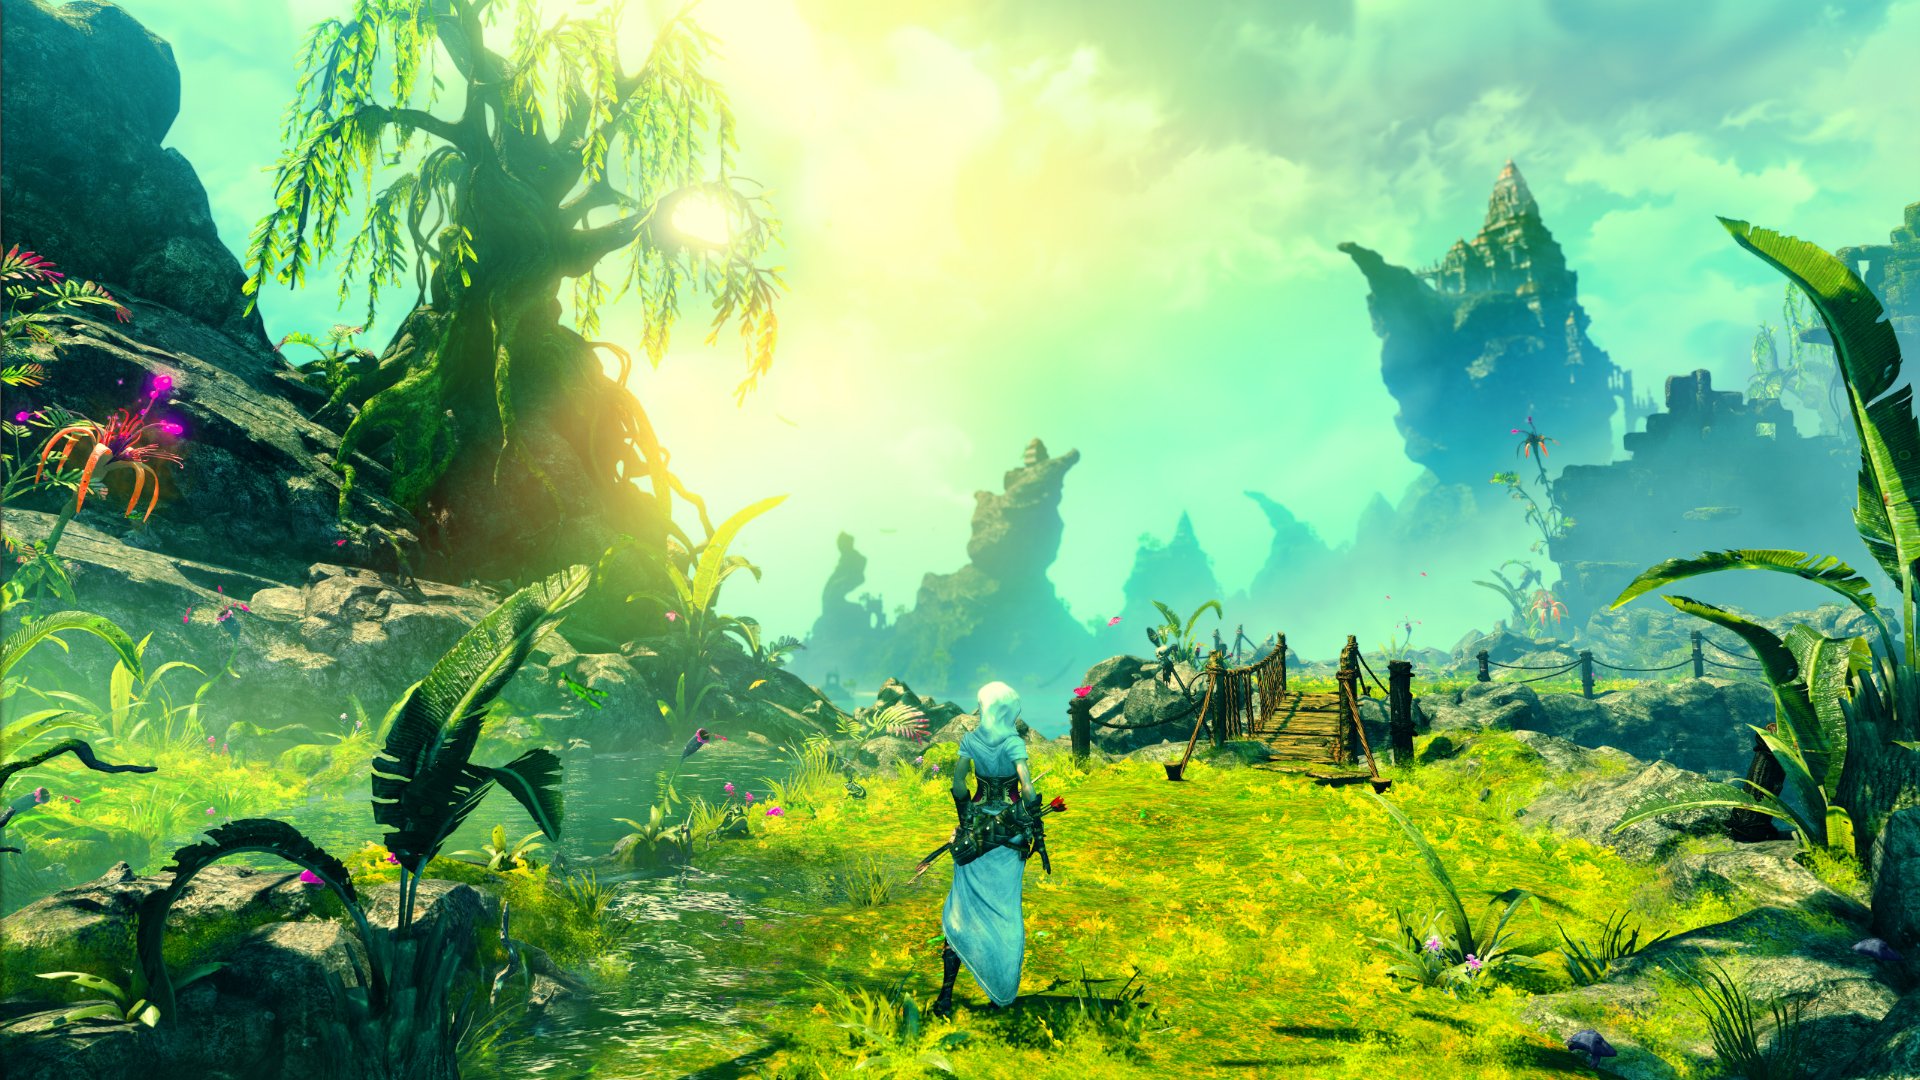 Video Game Trine 3 The Artifacts Of Power 1920x1080